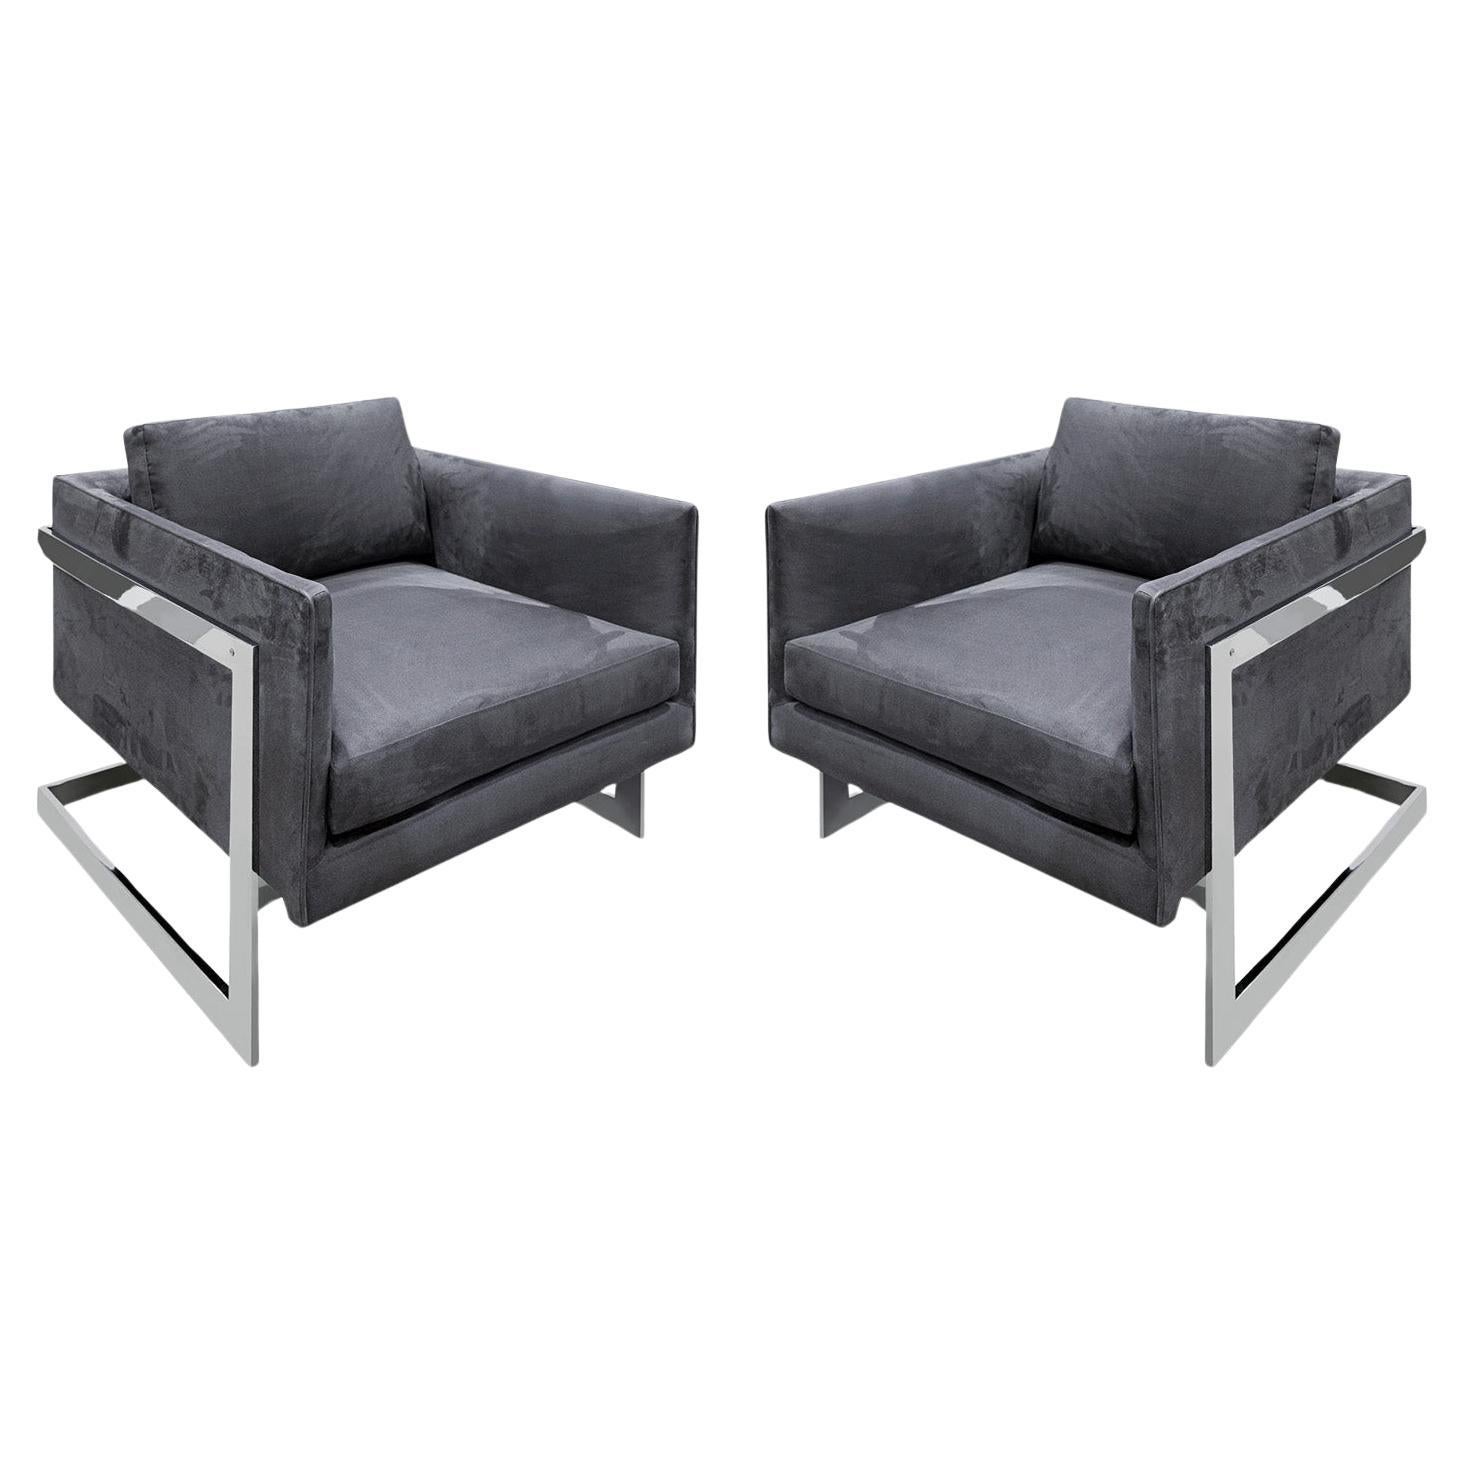 Milo Baughman Pair of Lounge Chairs with Polished Chrome Frames 1970s For Sale